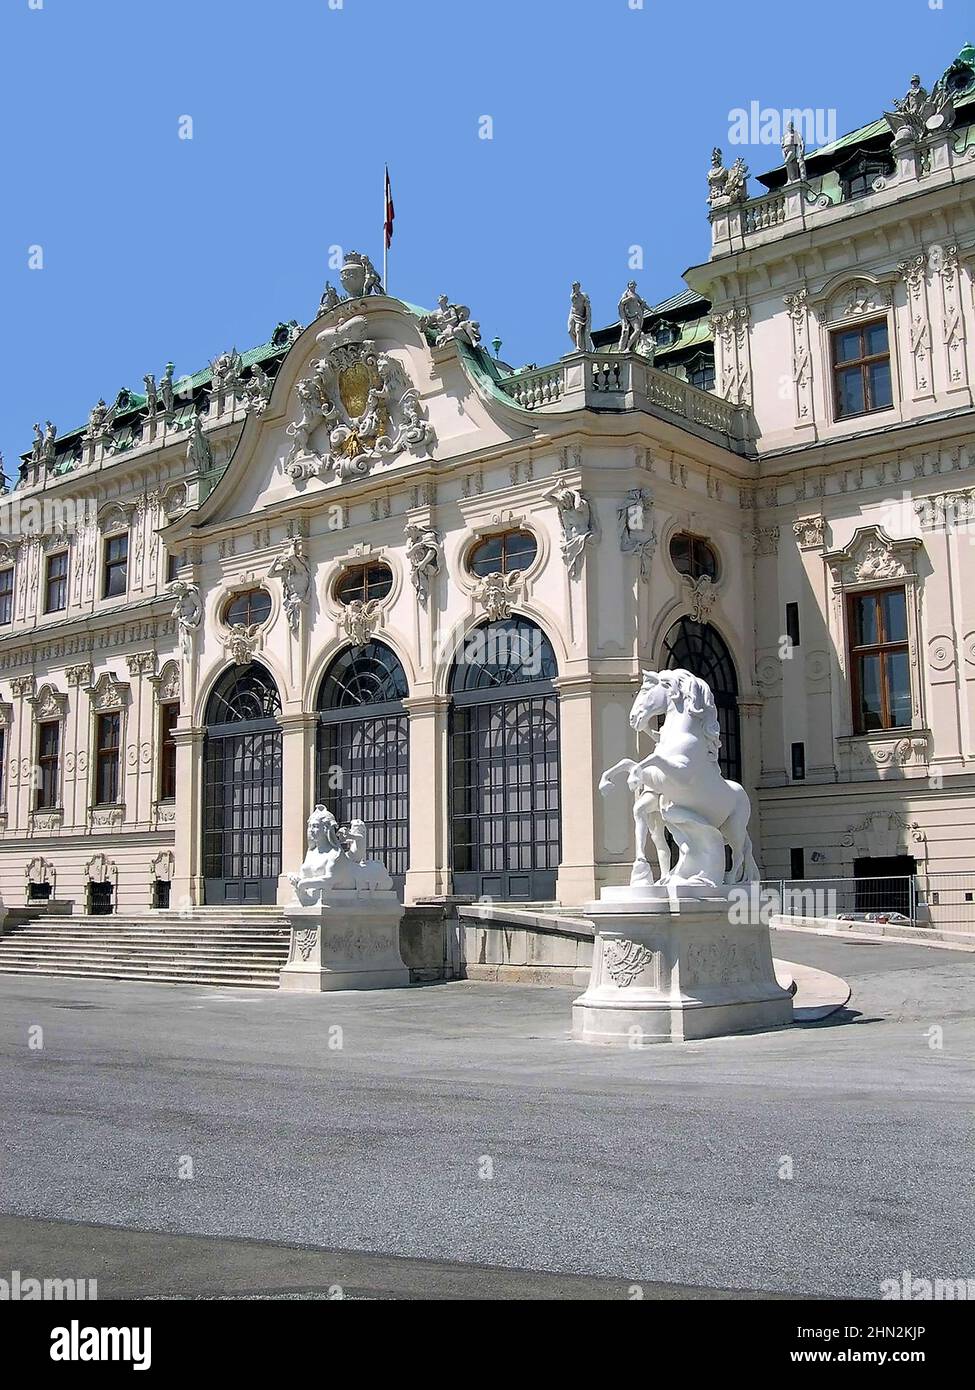 The Belvedere Palace and museum is a historic building complex in Vienna, Austria. It is two Baroque palaces, the Orangery, and the Palace Stables Stock Photo